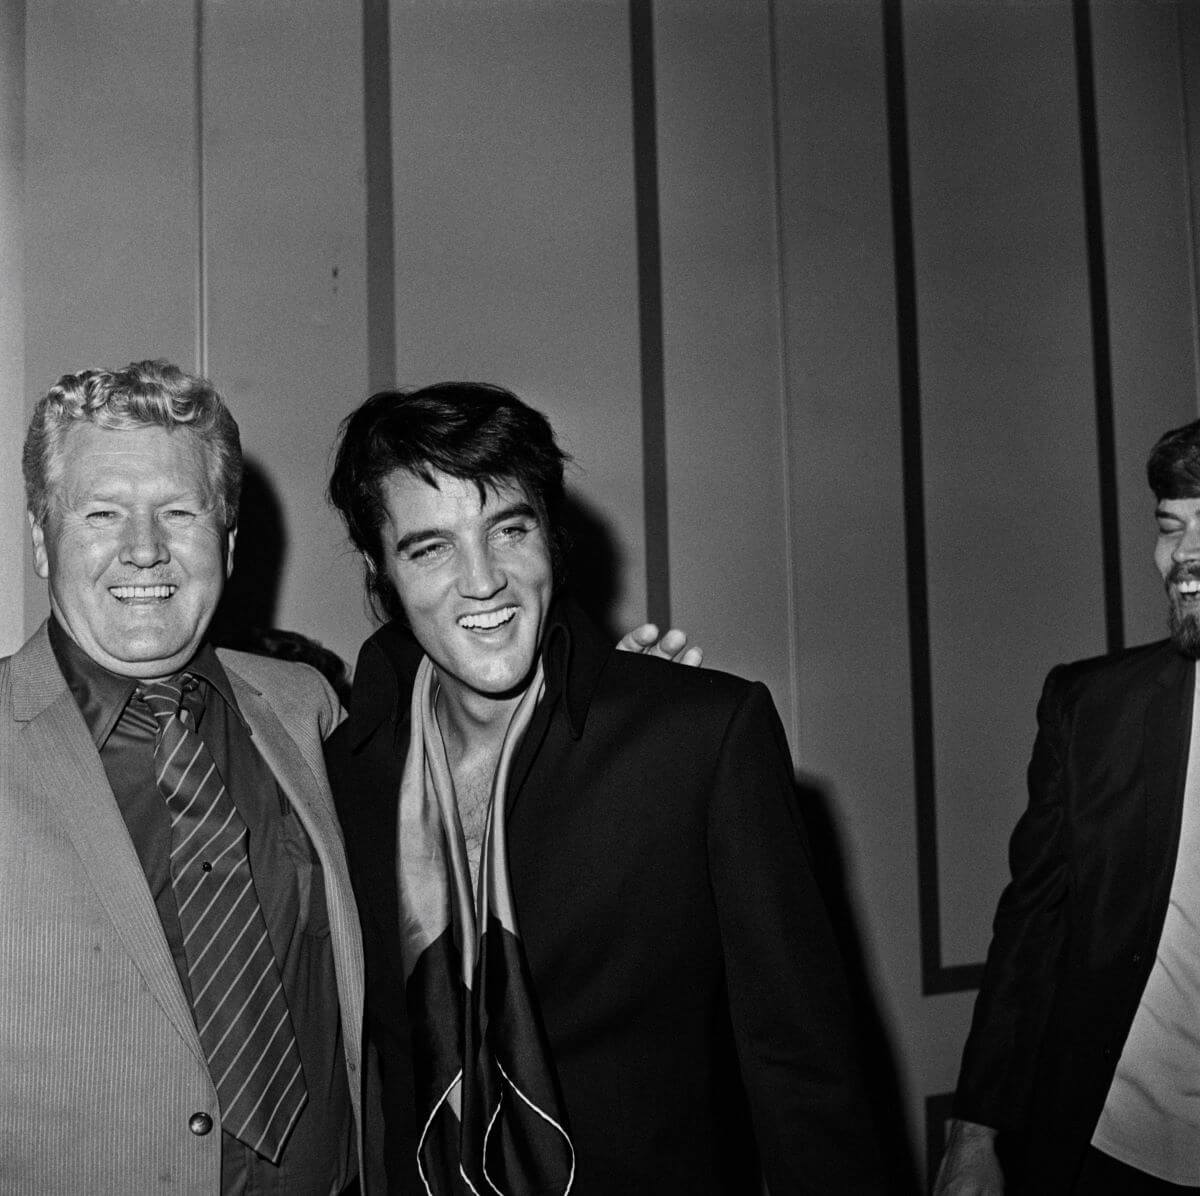 A black and white picture of Vernon Presley standing with his arm around Elvis' shoulders.